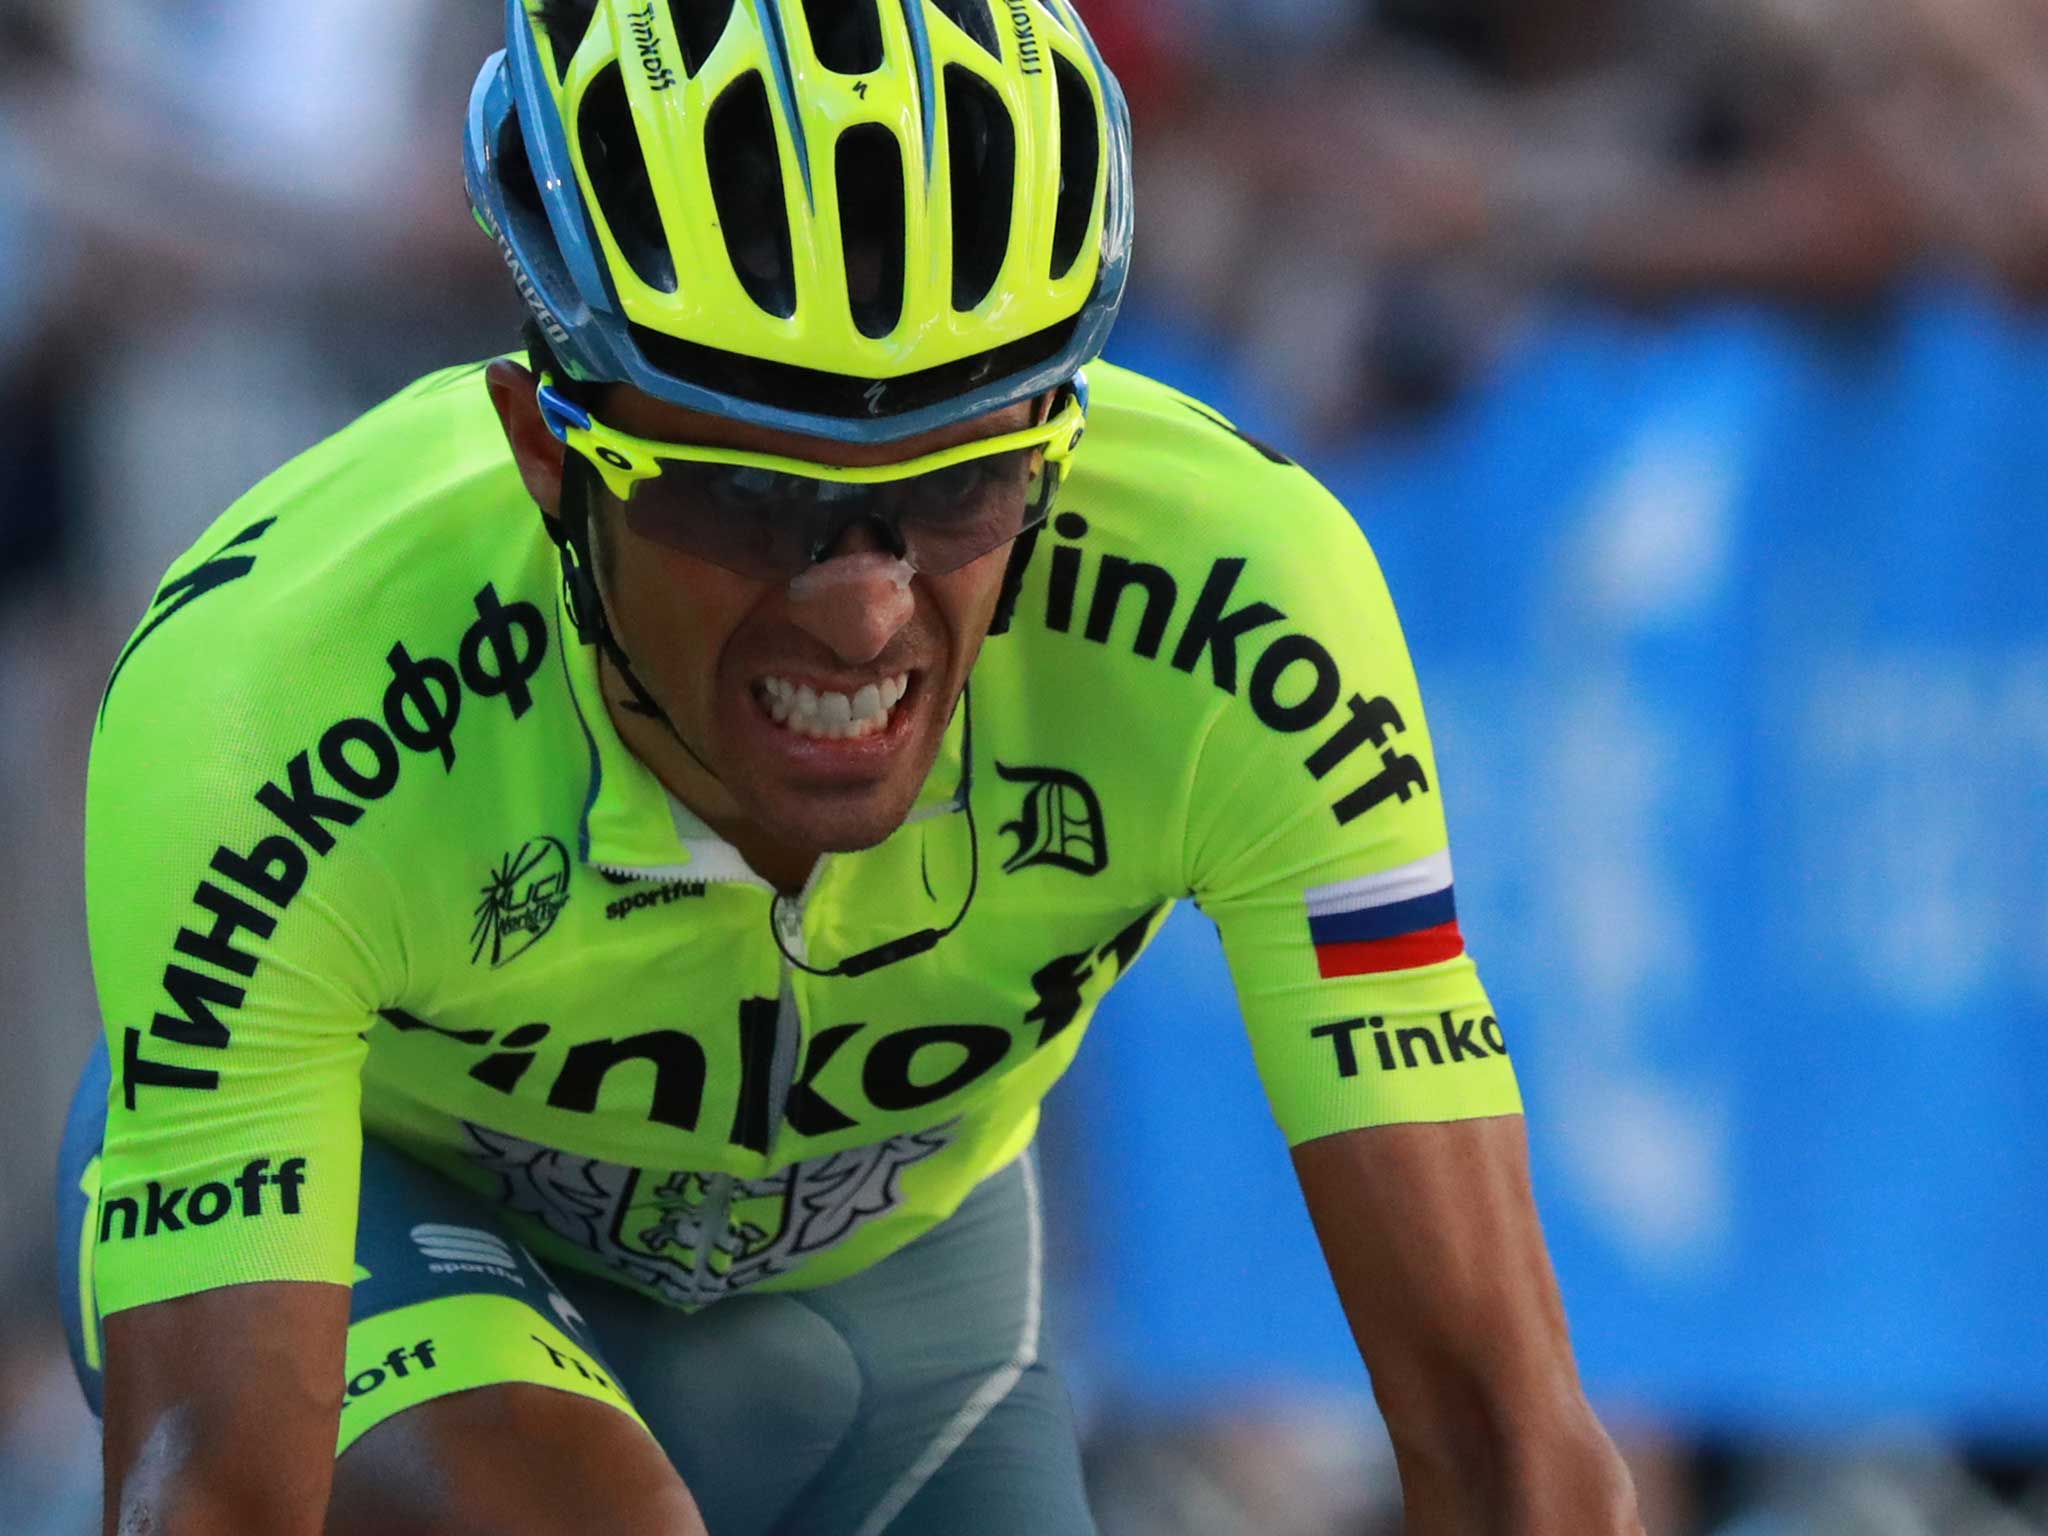 Tour de France: Alberto Contador pulls out with 'virus' as Chris Froome retains yellow jersey